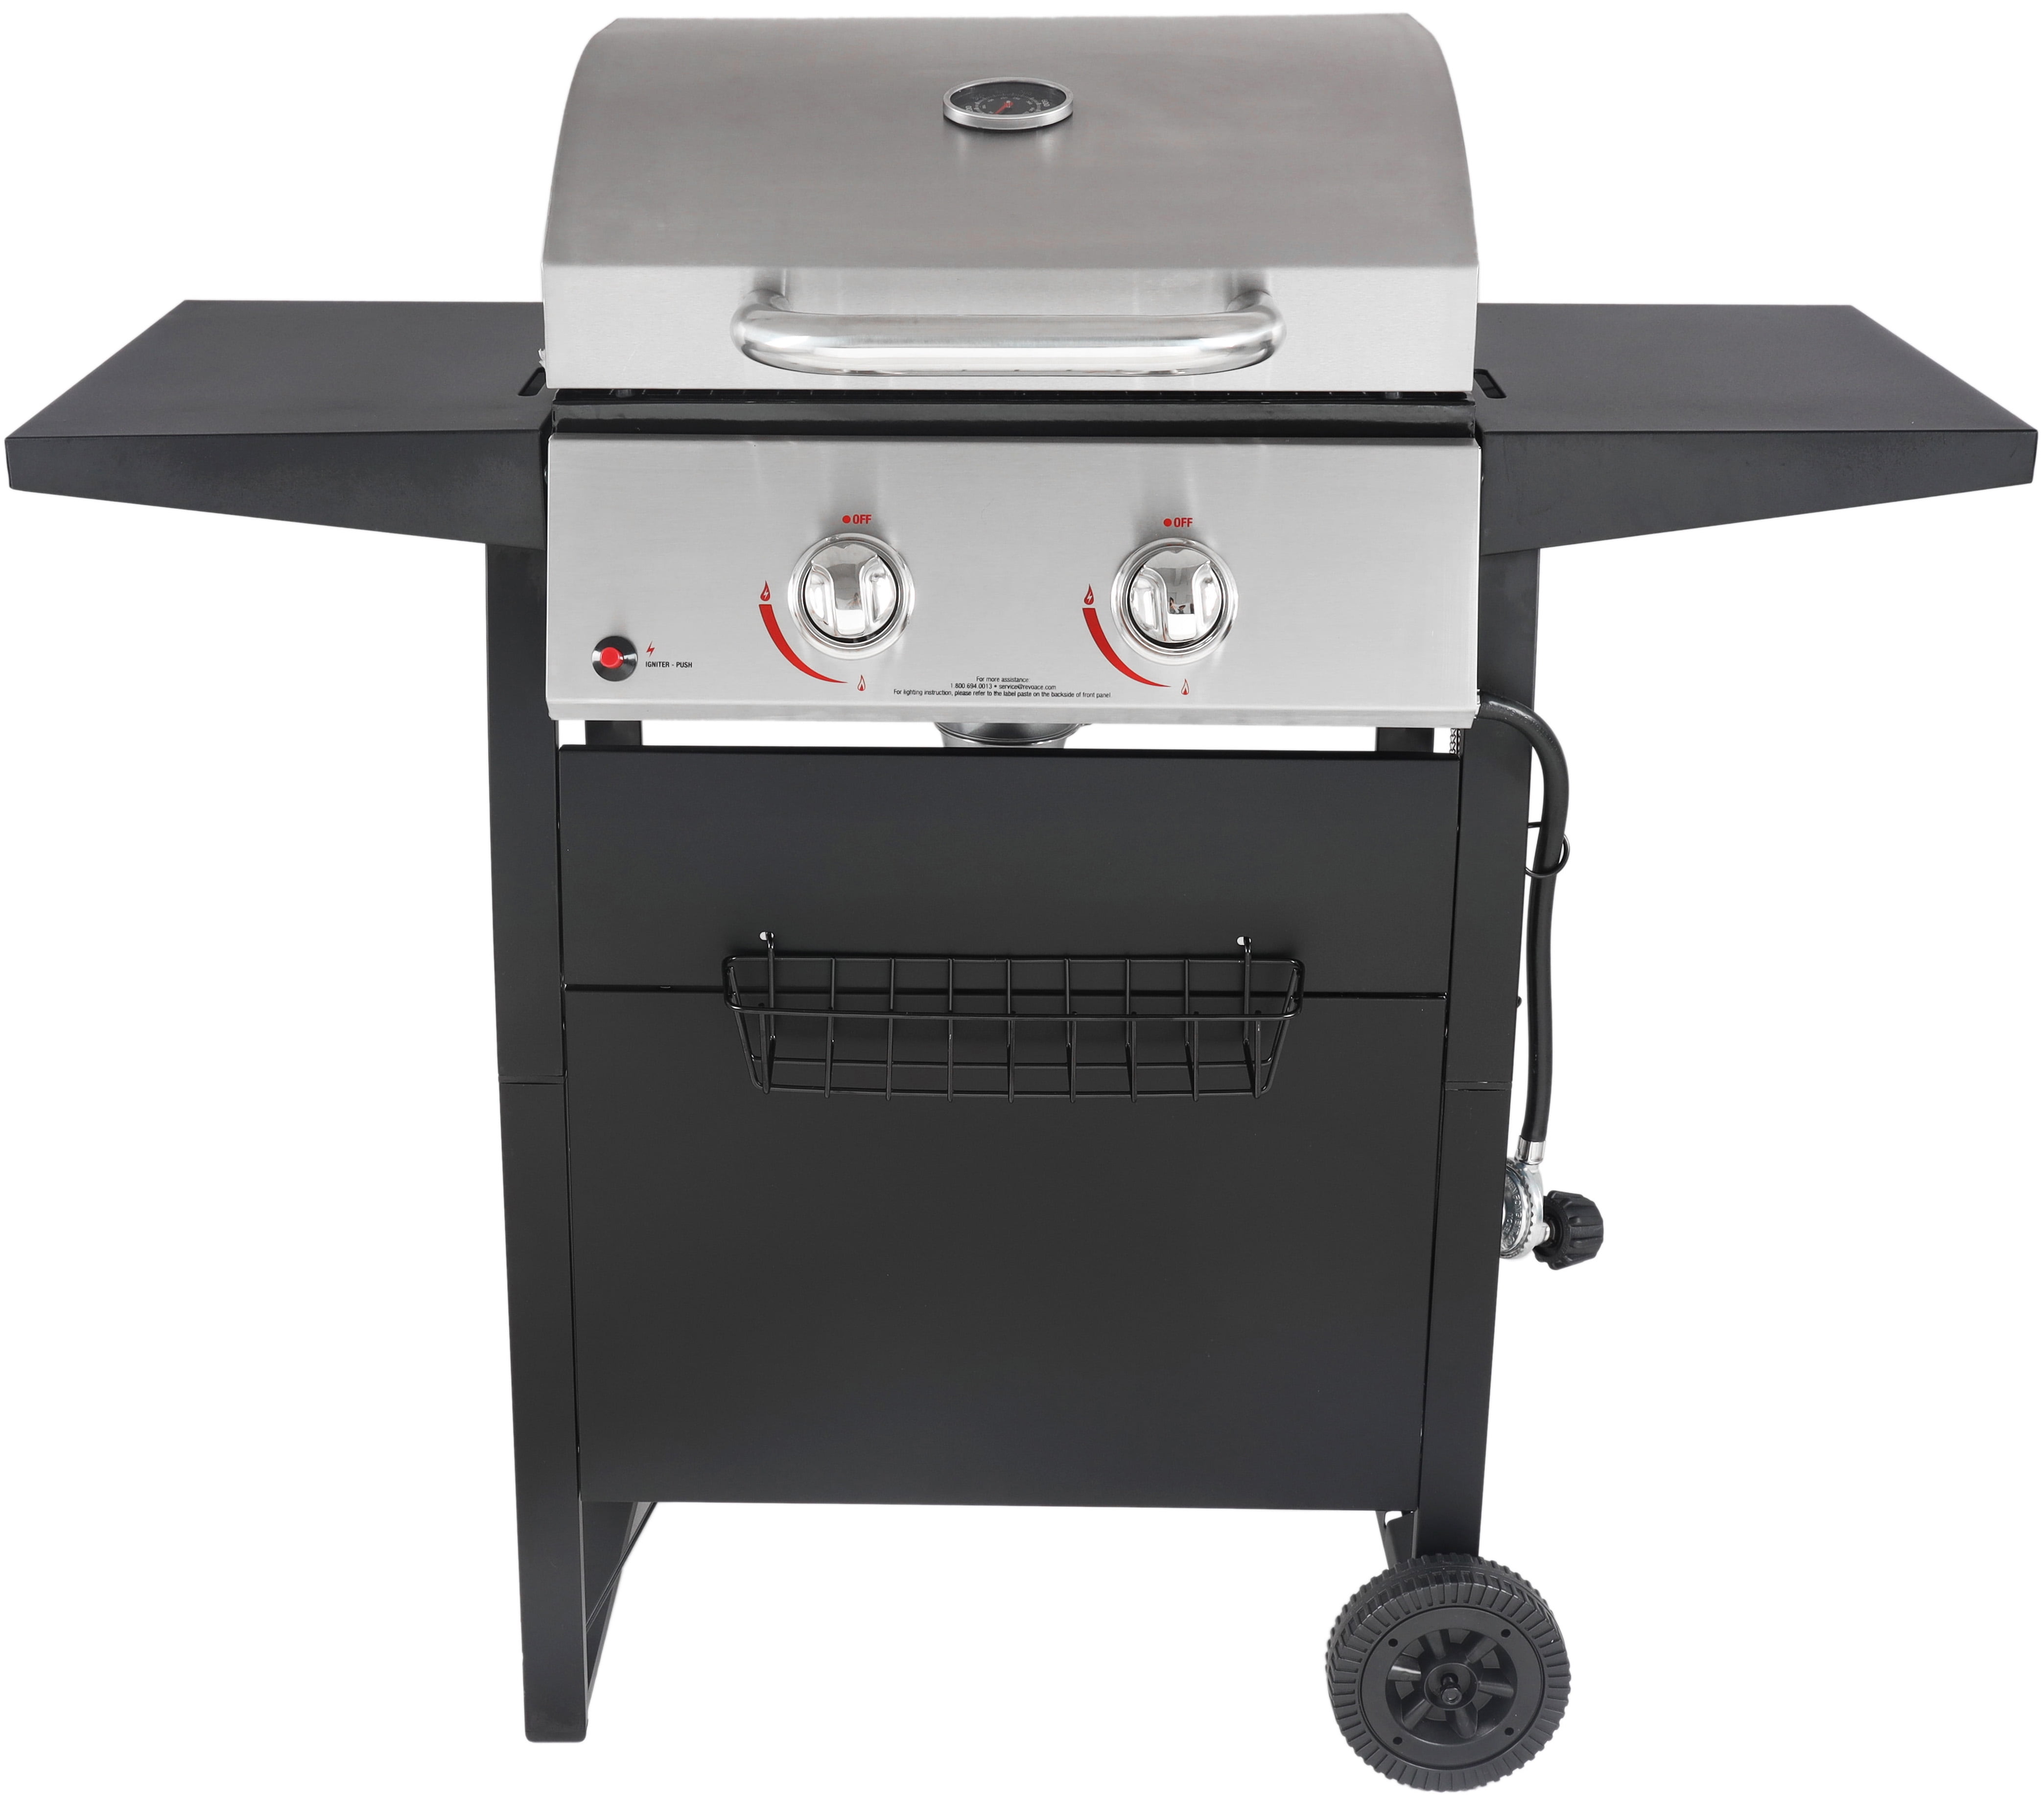 GAS GRILL 3 BURNER BBQ Backyard Patio Stainless Steel Barbecue Outdoor Cooking 